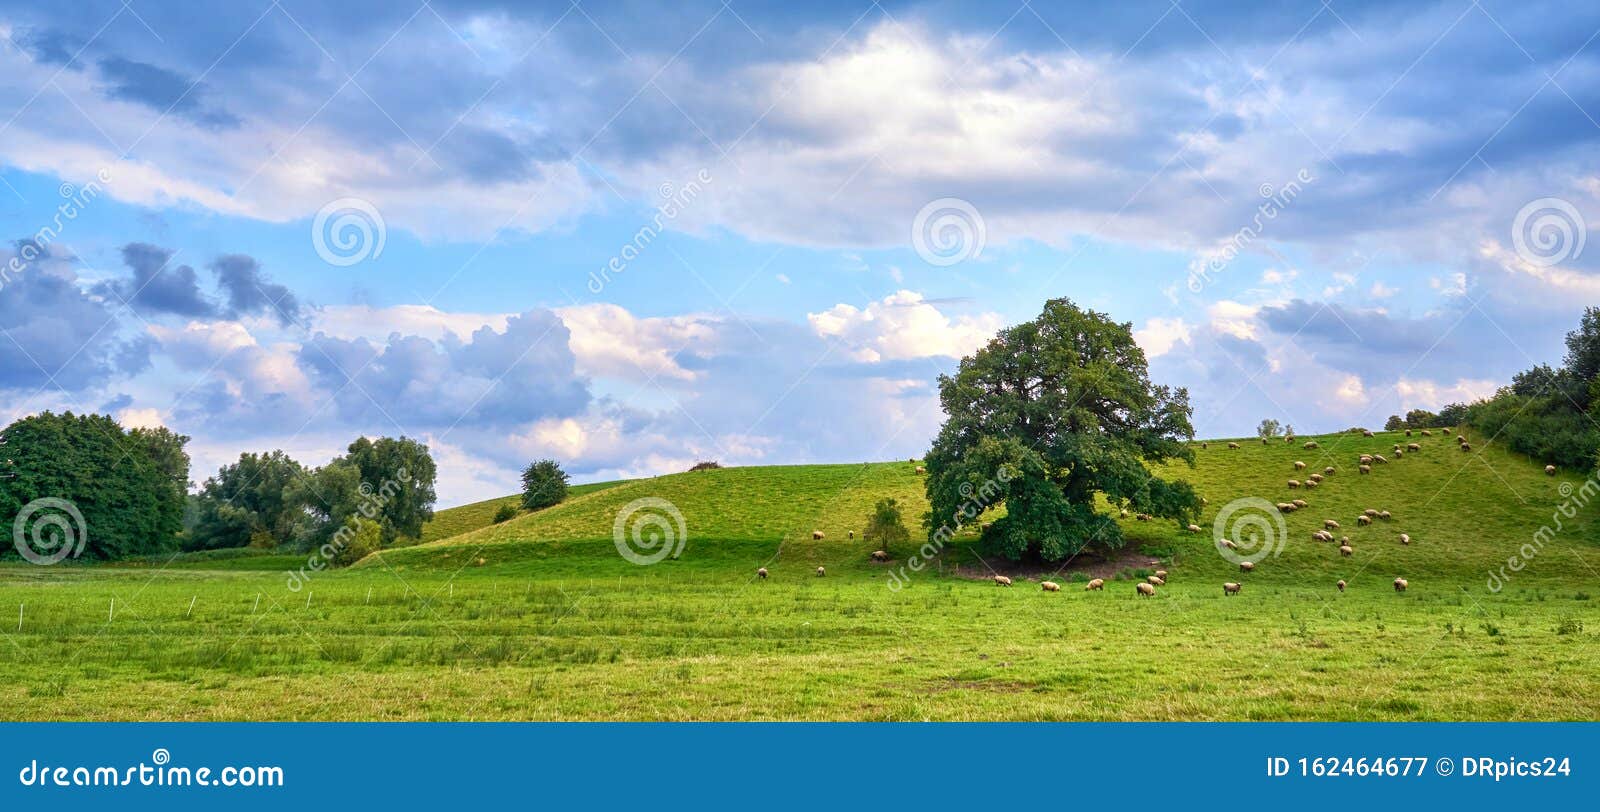 sheep grazing under the shade of a tree on the hillside in a meadow